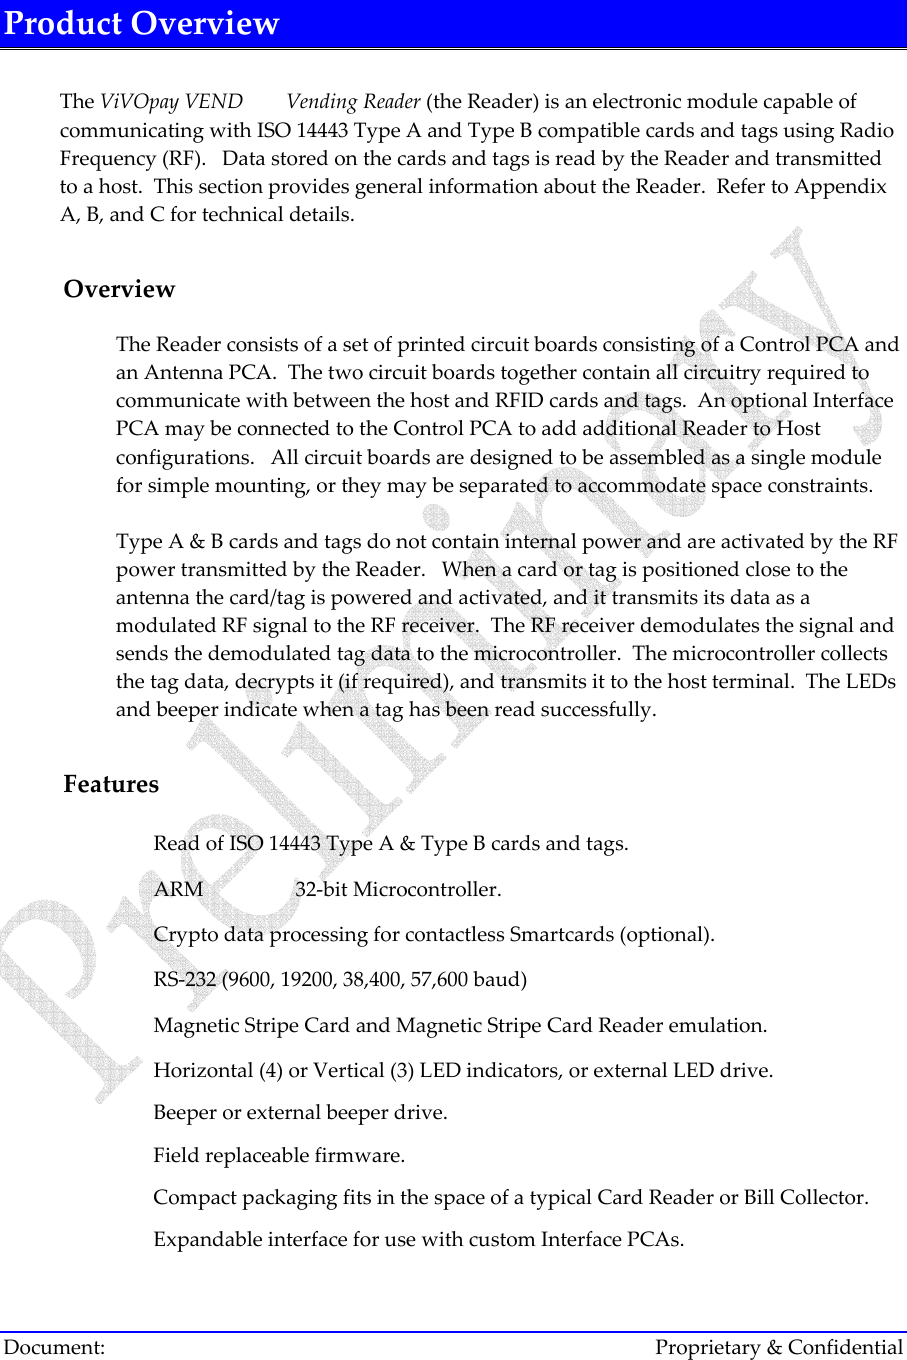 ViVOpay OEM S500 Technical Reference Document:        Proprietary &amp; Confidential Product Overview  The ViVOpay VEND   Vending Reader (the Reader) is an electronic module capable of communicating with ISO 14443 Type A and Type B compatible cards and tags using Radio Frequency (RF).   Data stored on the cards and tags is read by the Reader and transmitted to a host.  This section provides general information about the Reader.  Refer to Appendix A, B, and C for technical details.  Overview The Reader consists of a set of printed circuit boards consisting of a Control PCA and an Antenna PCA.  The two circuit boards together contain all circuitry required to communicate with between the host and RFID cards and tags.  An optional Interface PCA may be connected to the Control PCA to add additional Reader to Host configurations.   All circuit boards are designed to be assembled as a single module for simple mounting, or they may be separated to accommodate space constraints.    Type A &amp; B cards and tags do not contain internal power and are activated by the RF power transmitted by the Reader.   When a card or tag is positioned close to the antenna the card/tag is powered and activated, and it transmits its data as a modulated RF signal to the RF receiver.  The RF receiver demodulates the signal and sends the demodulated tag data to the microcontroller.  The microcontroller collects the tag data, decrypts it (if required), and transmits it to the host terminal.  The LEDs and beeper indicate when a tag has been read successfully.   Features  Read of ISO 14443 Type A &amp; Type B cards and tags.  ARM   32-bit Microcontroller.  Crypto data processing for contactless Smartcards (optional).  RS-232 (9600, 19200, 38,400, 57,600 baud)  Magnetic Stripe Card and Magnetic Stripe Card Reader emulation.  Horizontal (4) or Vertical (3) LED indicators, or external LED drive.  Beeper or external beeper drive.  Field replaceable firmware.  Compact packaging fits in the space of a typical Card Reader or Bill Collector.  Expandable interface for use with custom Interface PCAs. 